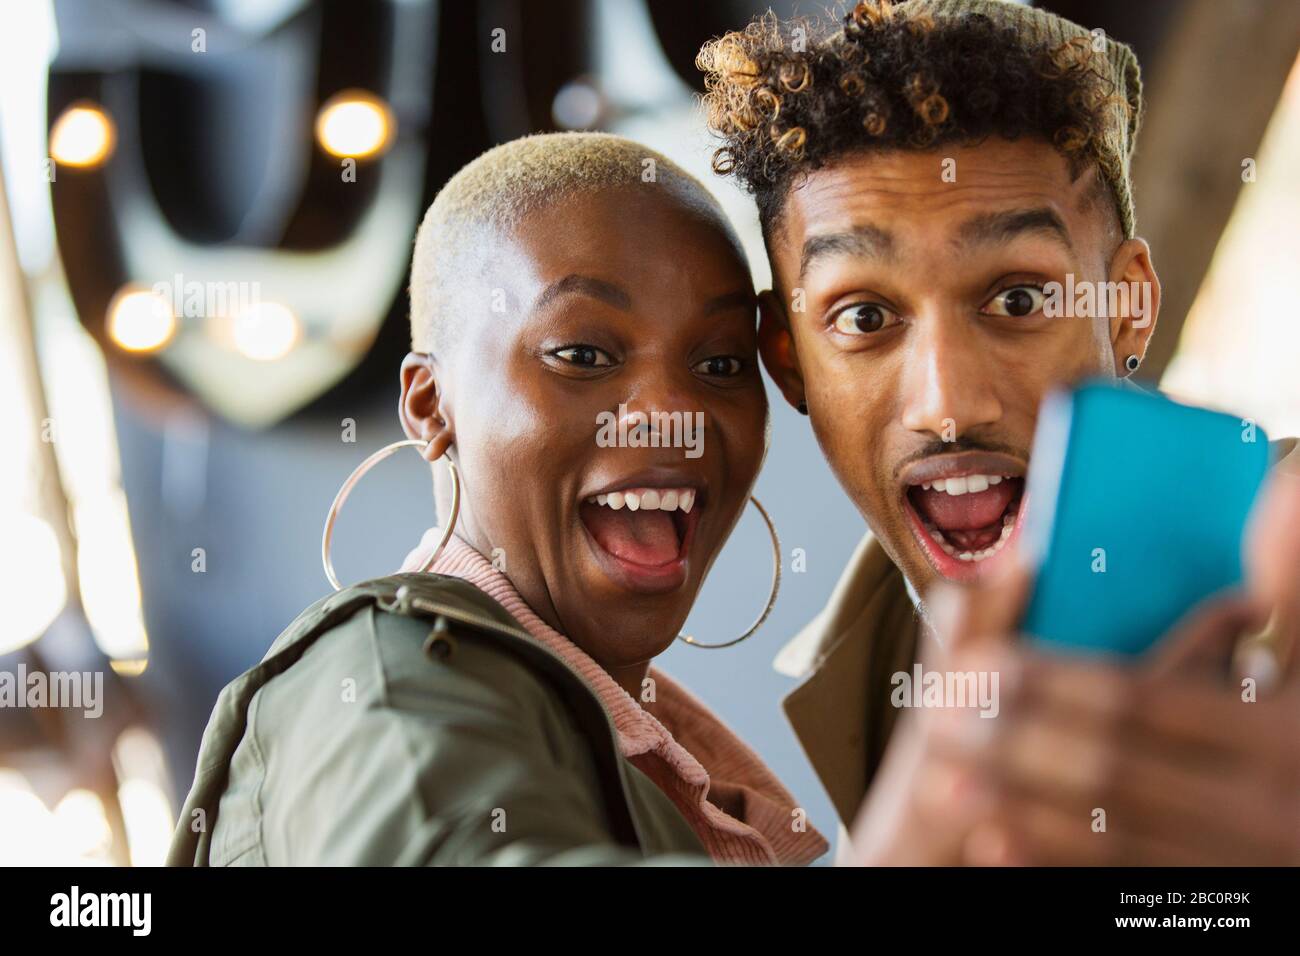 Playful young couple taking selfie with camera phone Stock Photo